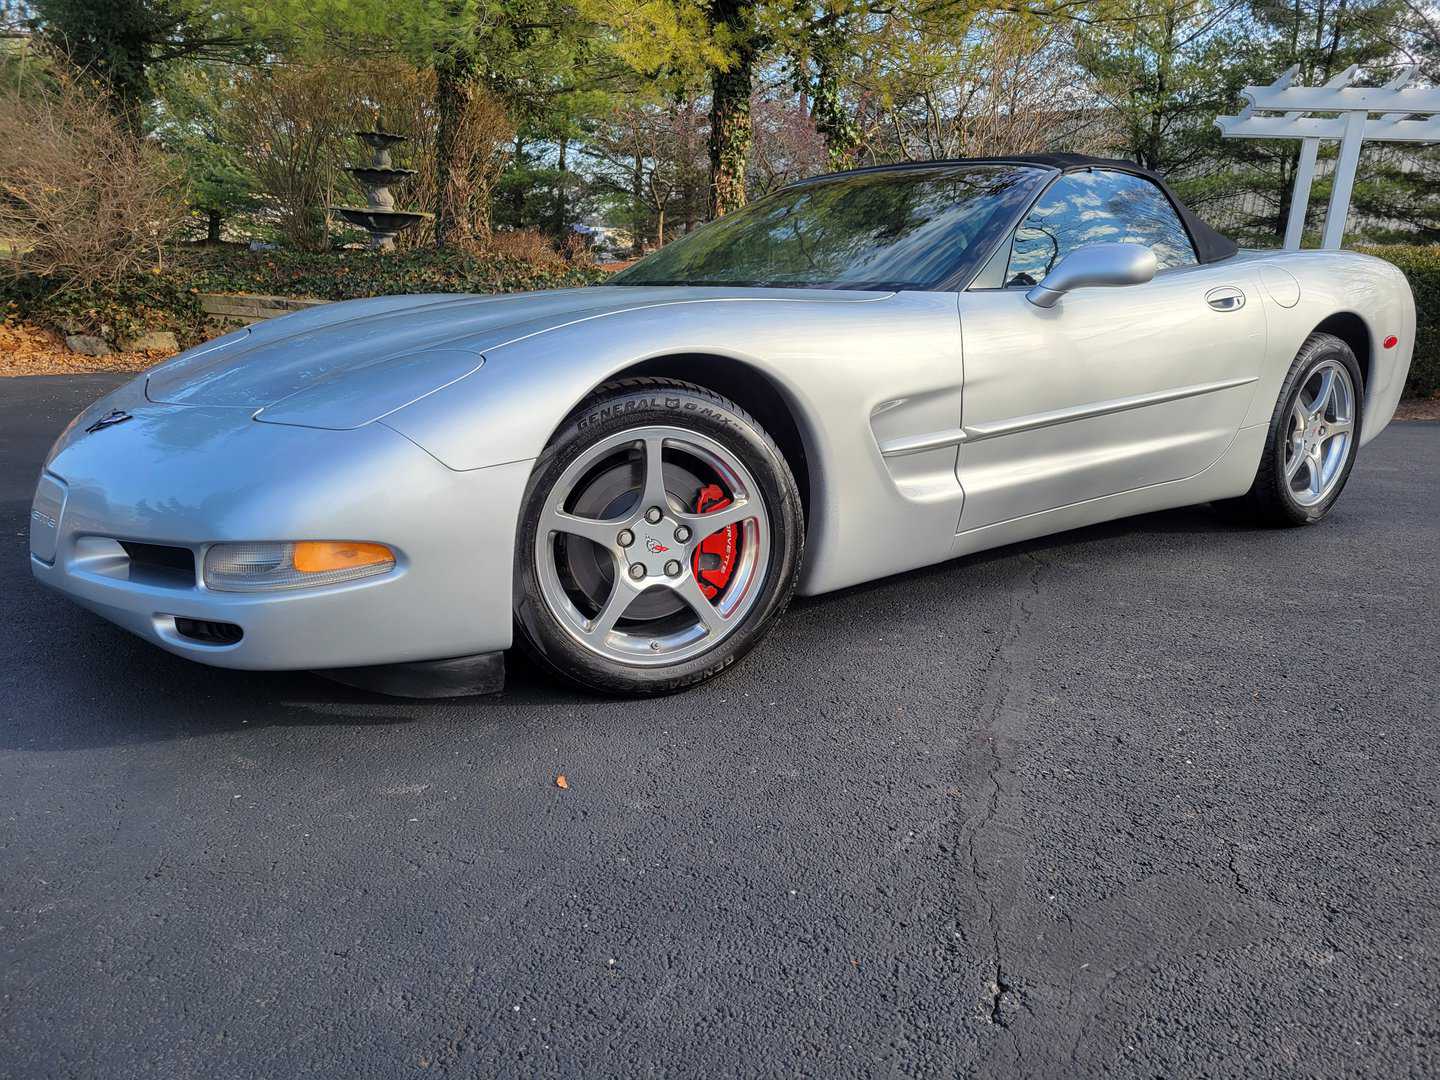 A Silver 2001 Chevrolet Corvette Parked In A Parking Lot.